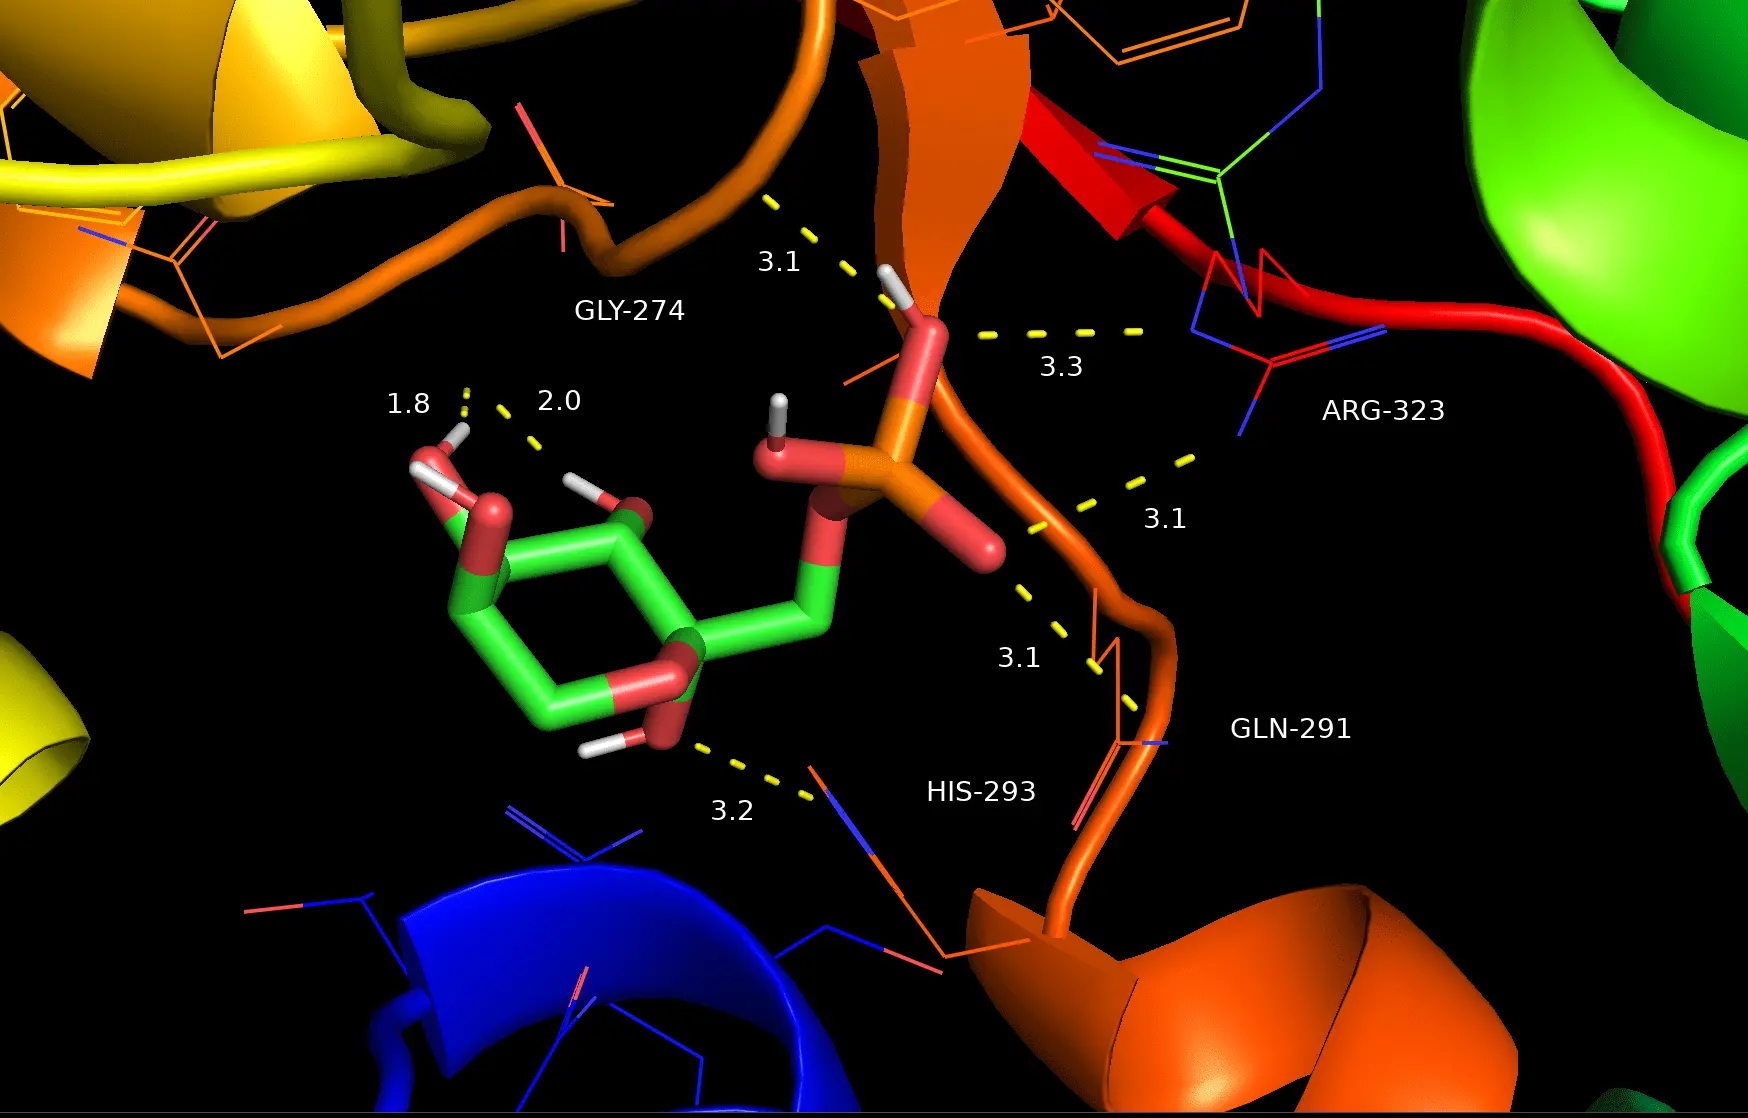 Visualisation of interactions between FruR and F1P on PyMol